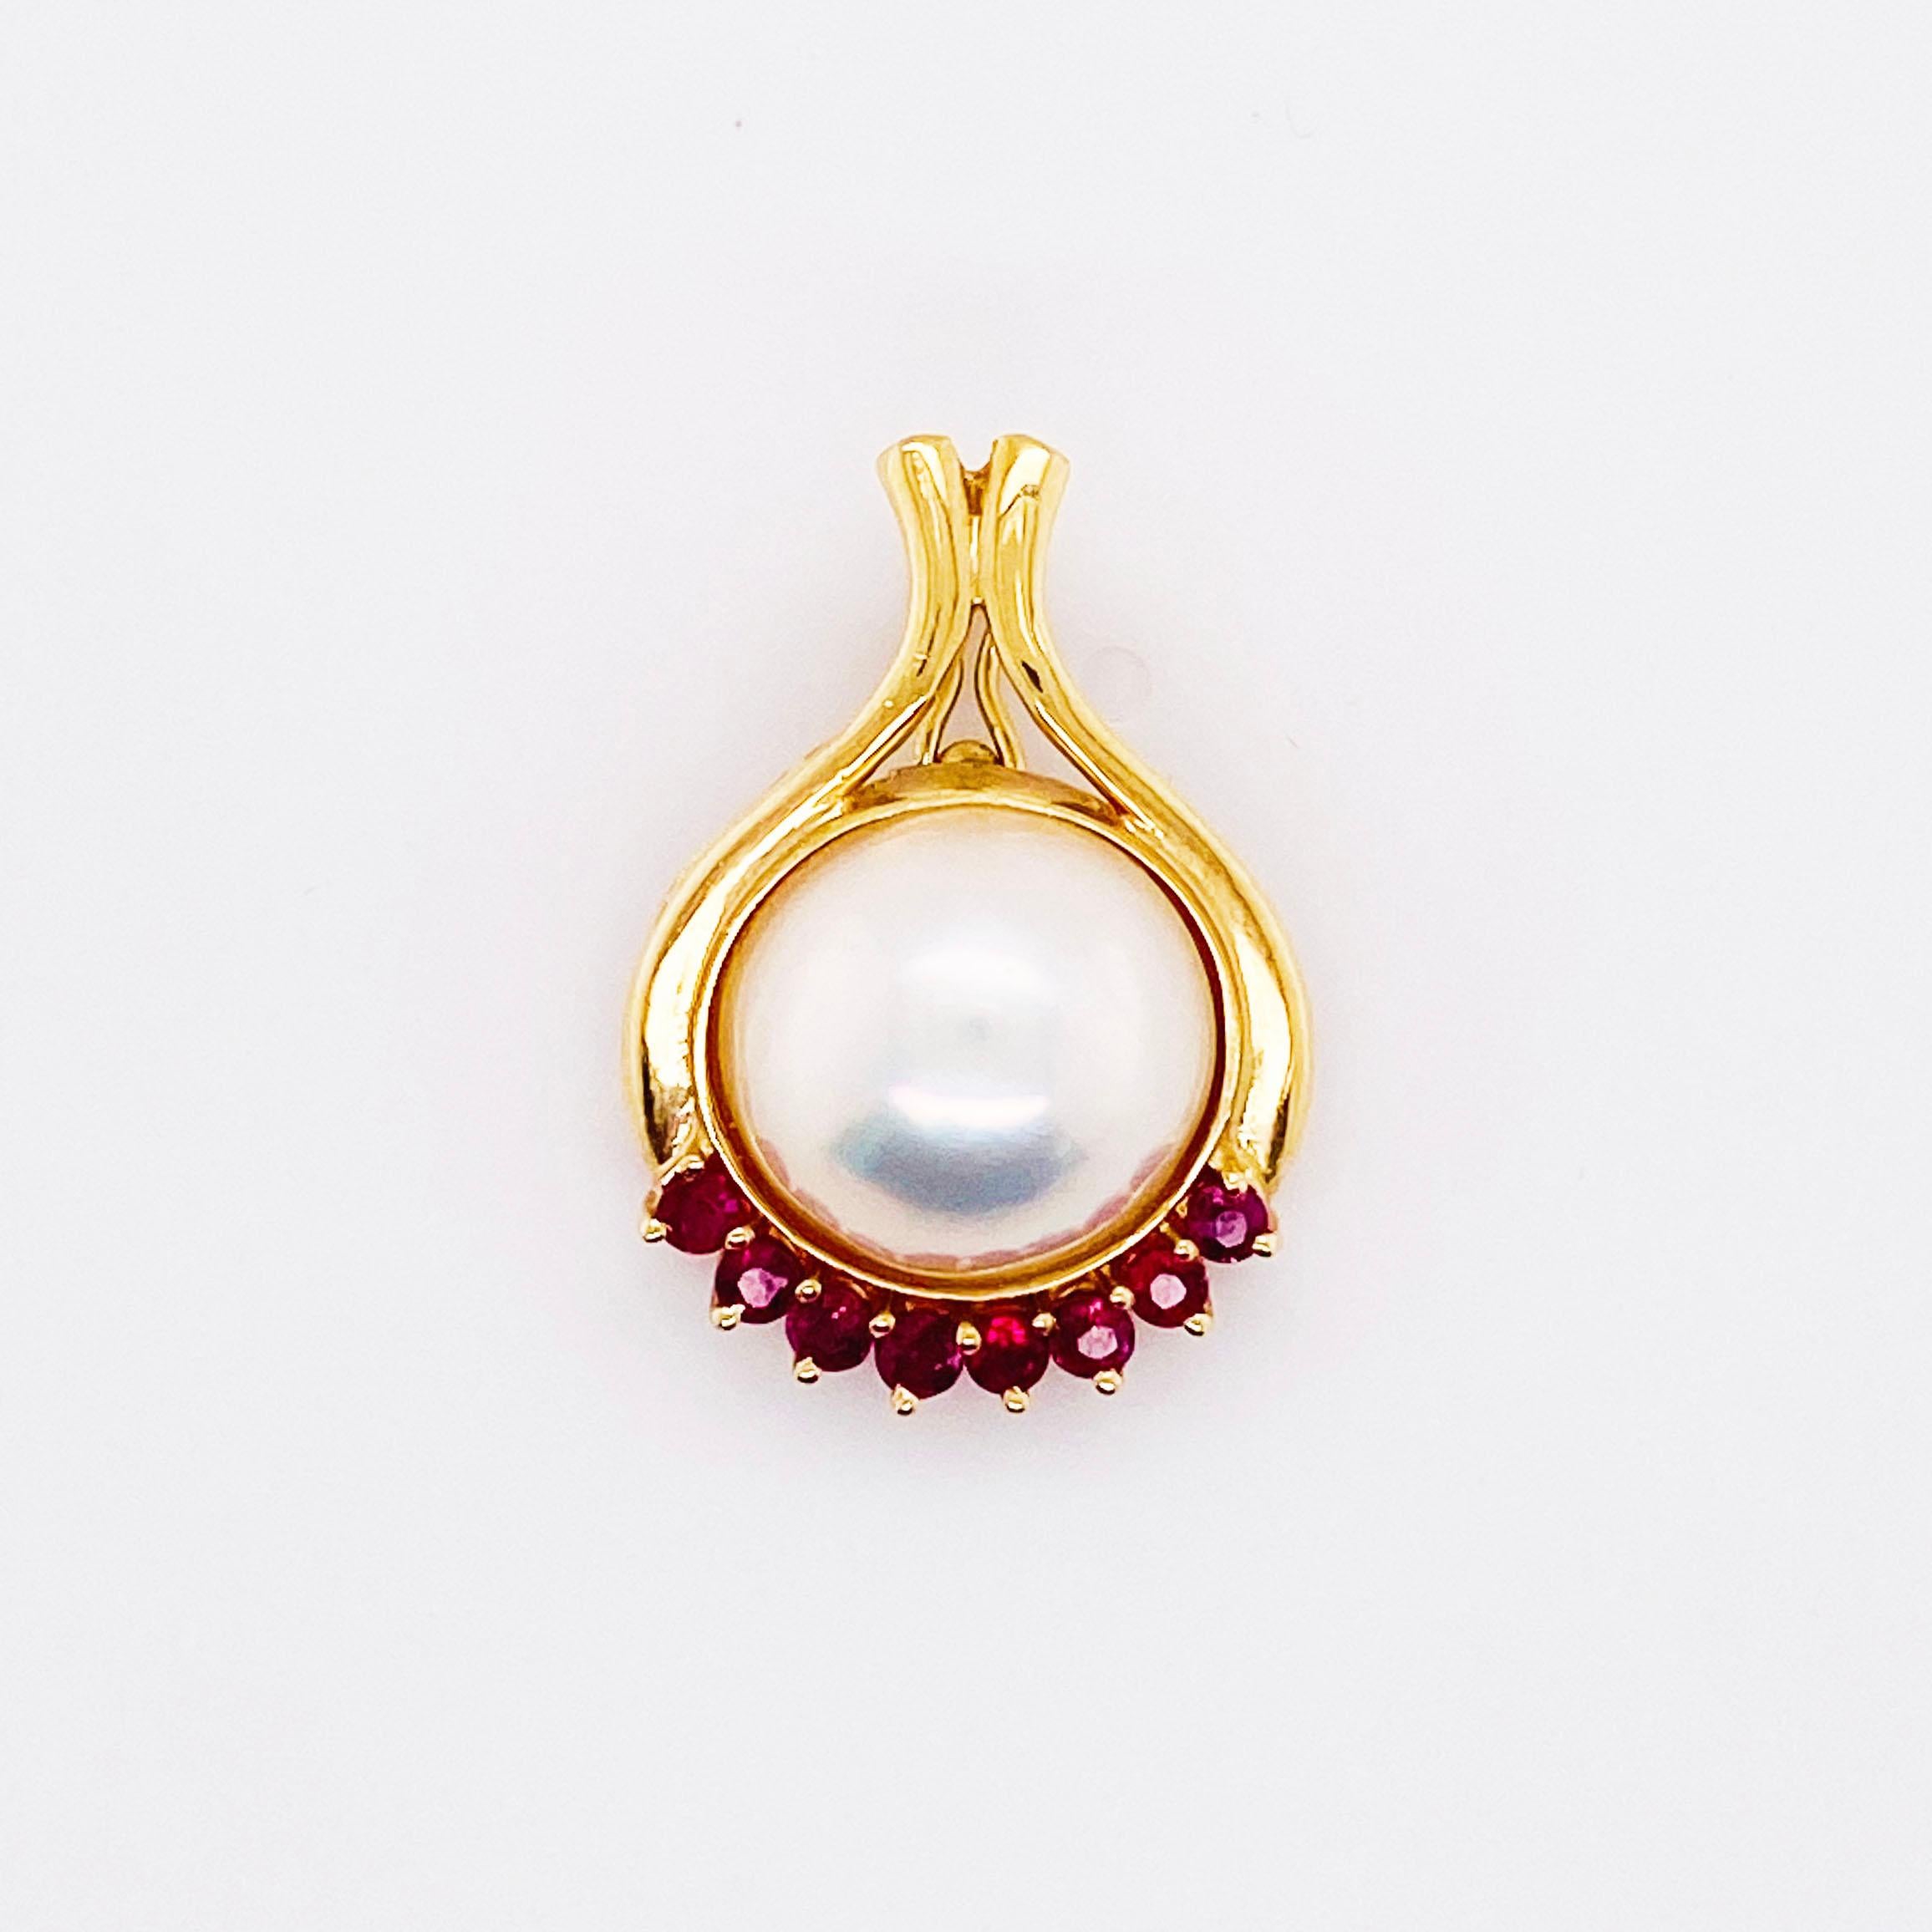 Pearls and rubies are a beautiful combination and this pendant enhancer has this very design!  The mabe pearl is twelve (12) millimeters with gorgeous luster, orient, and a beautiful rose/white color.  There are seven-.07 to .075 carat round, red